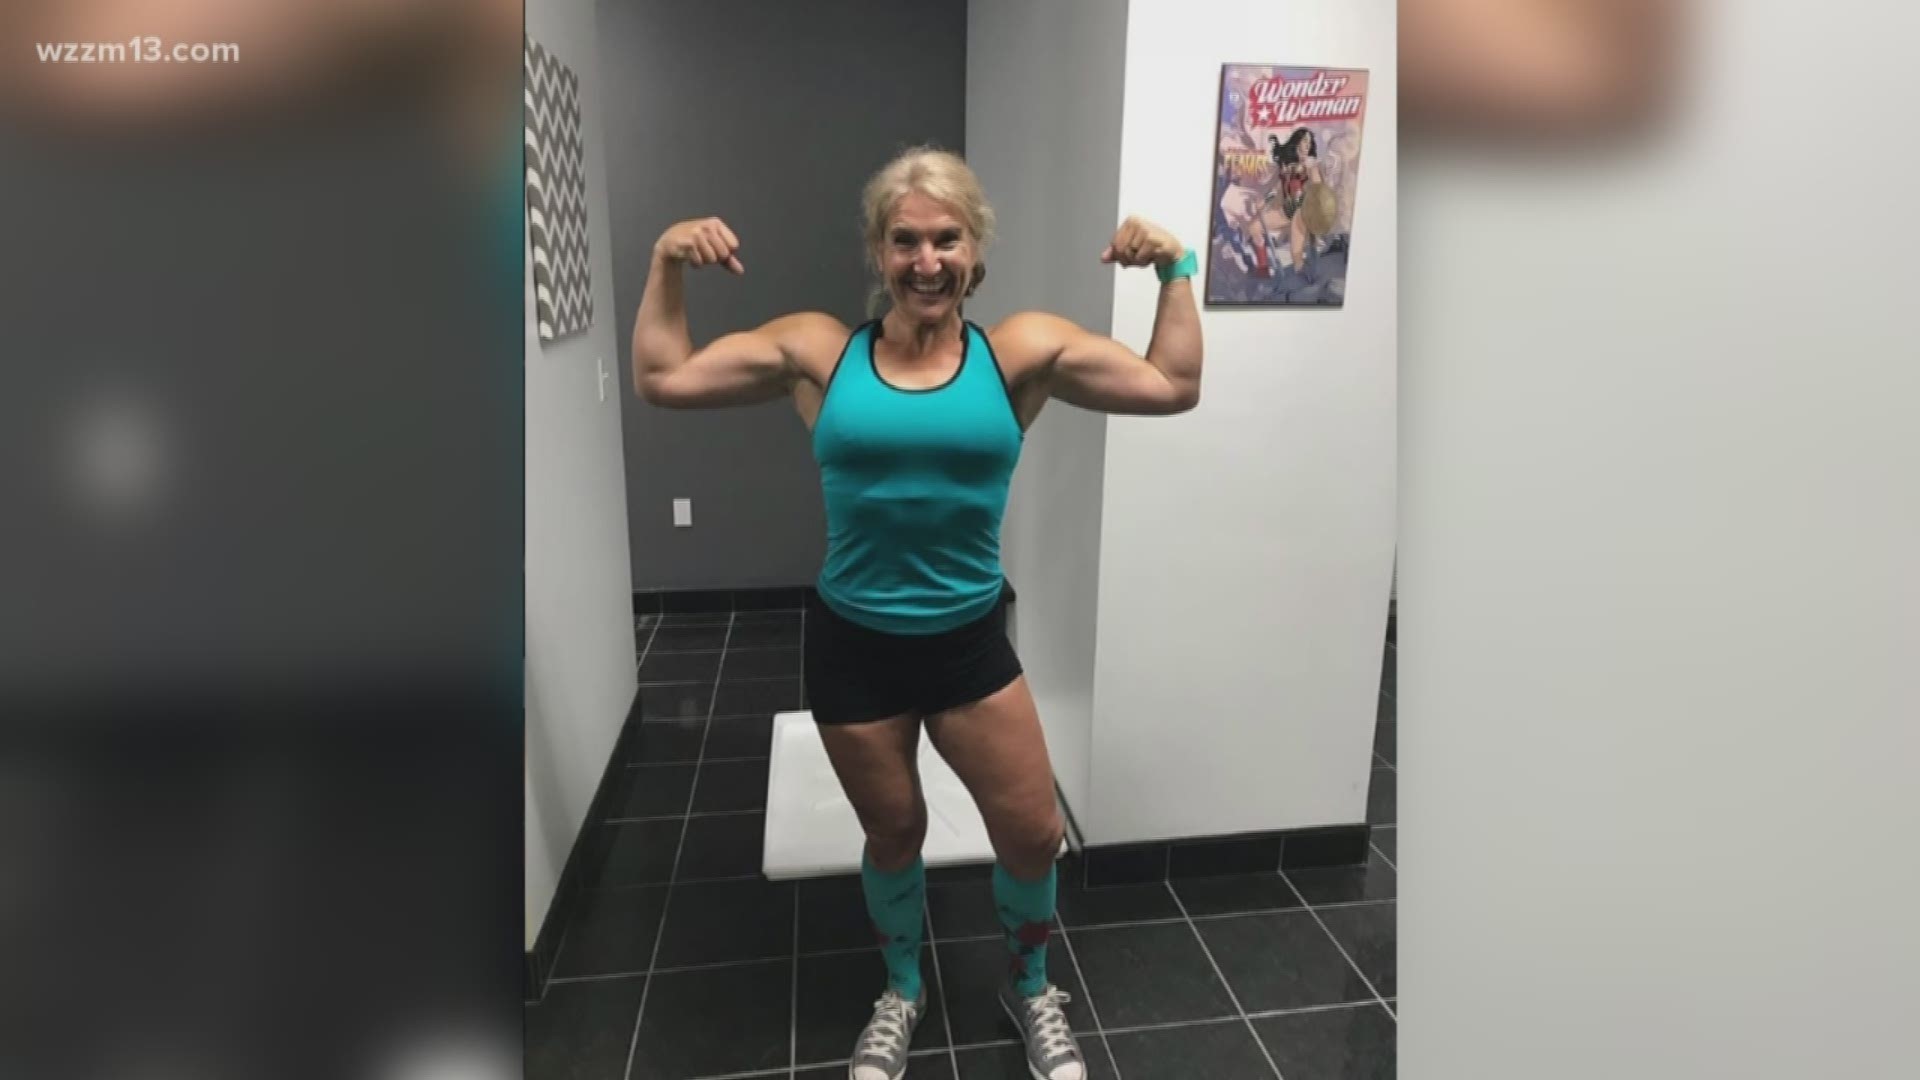 West Mich. woman headed to England for powerlifting competition